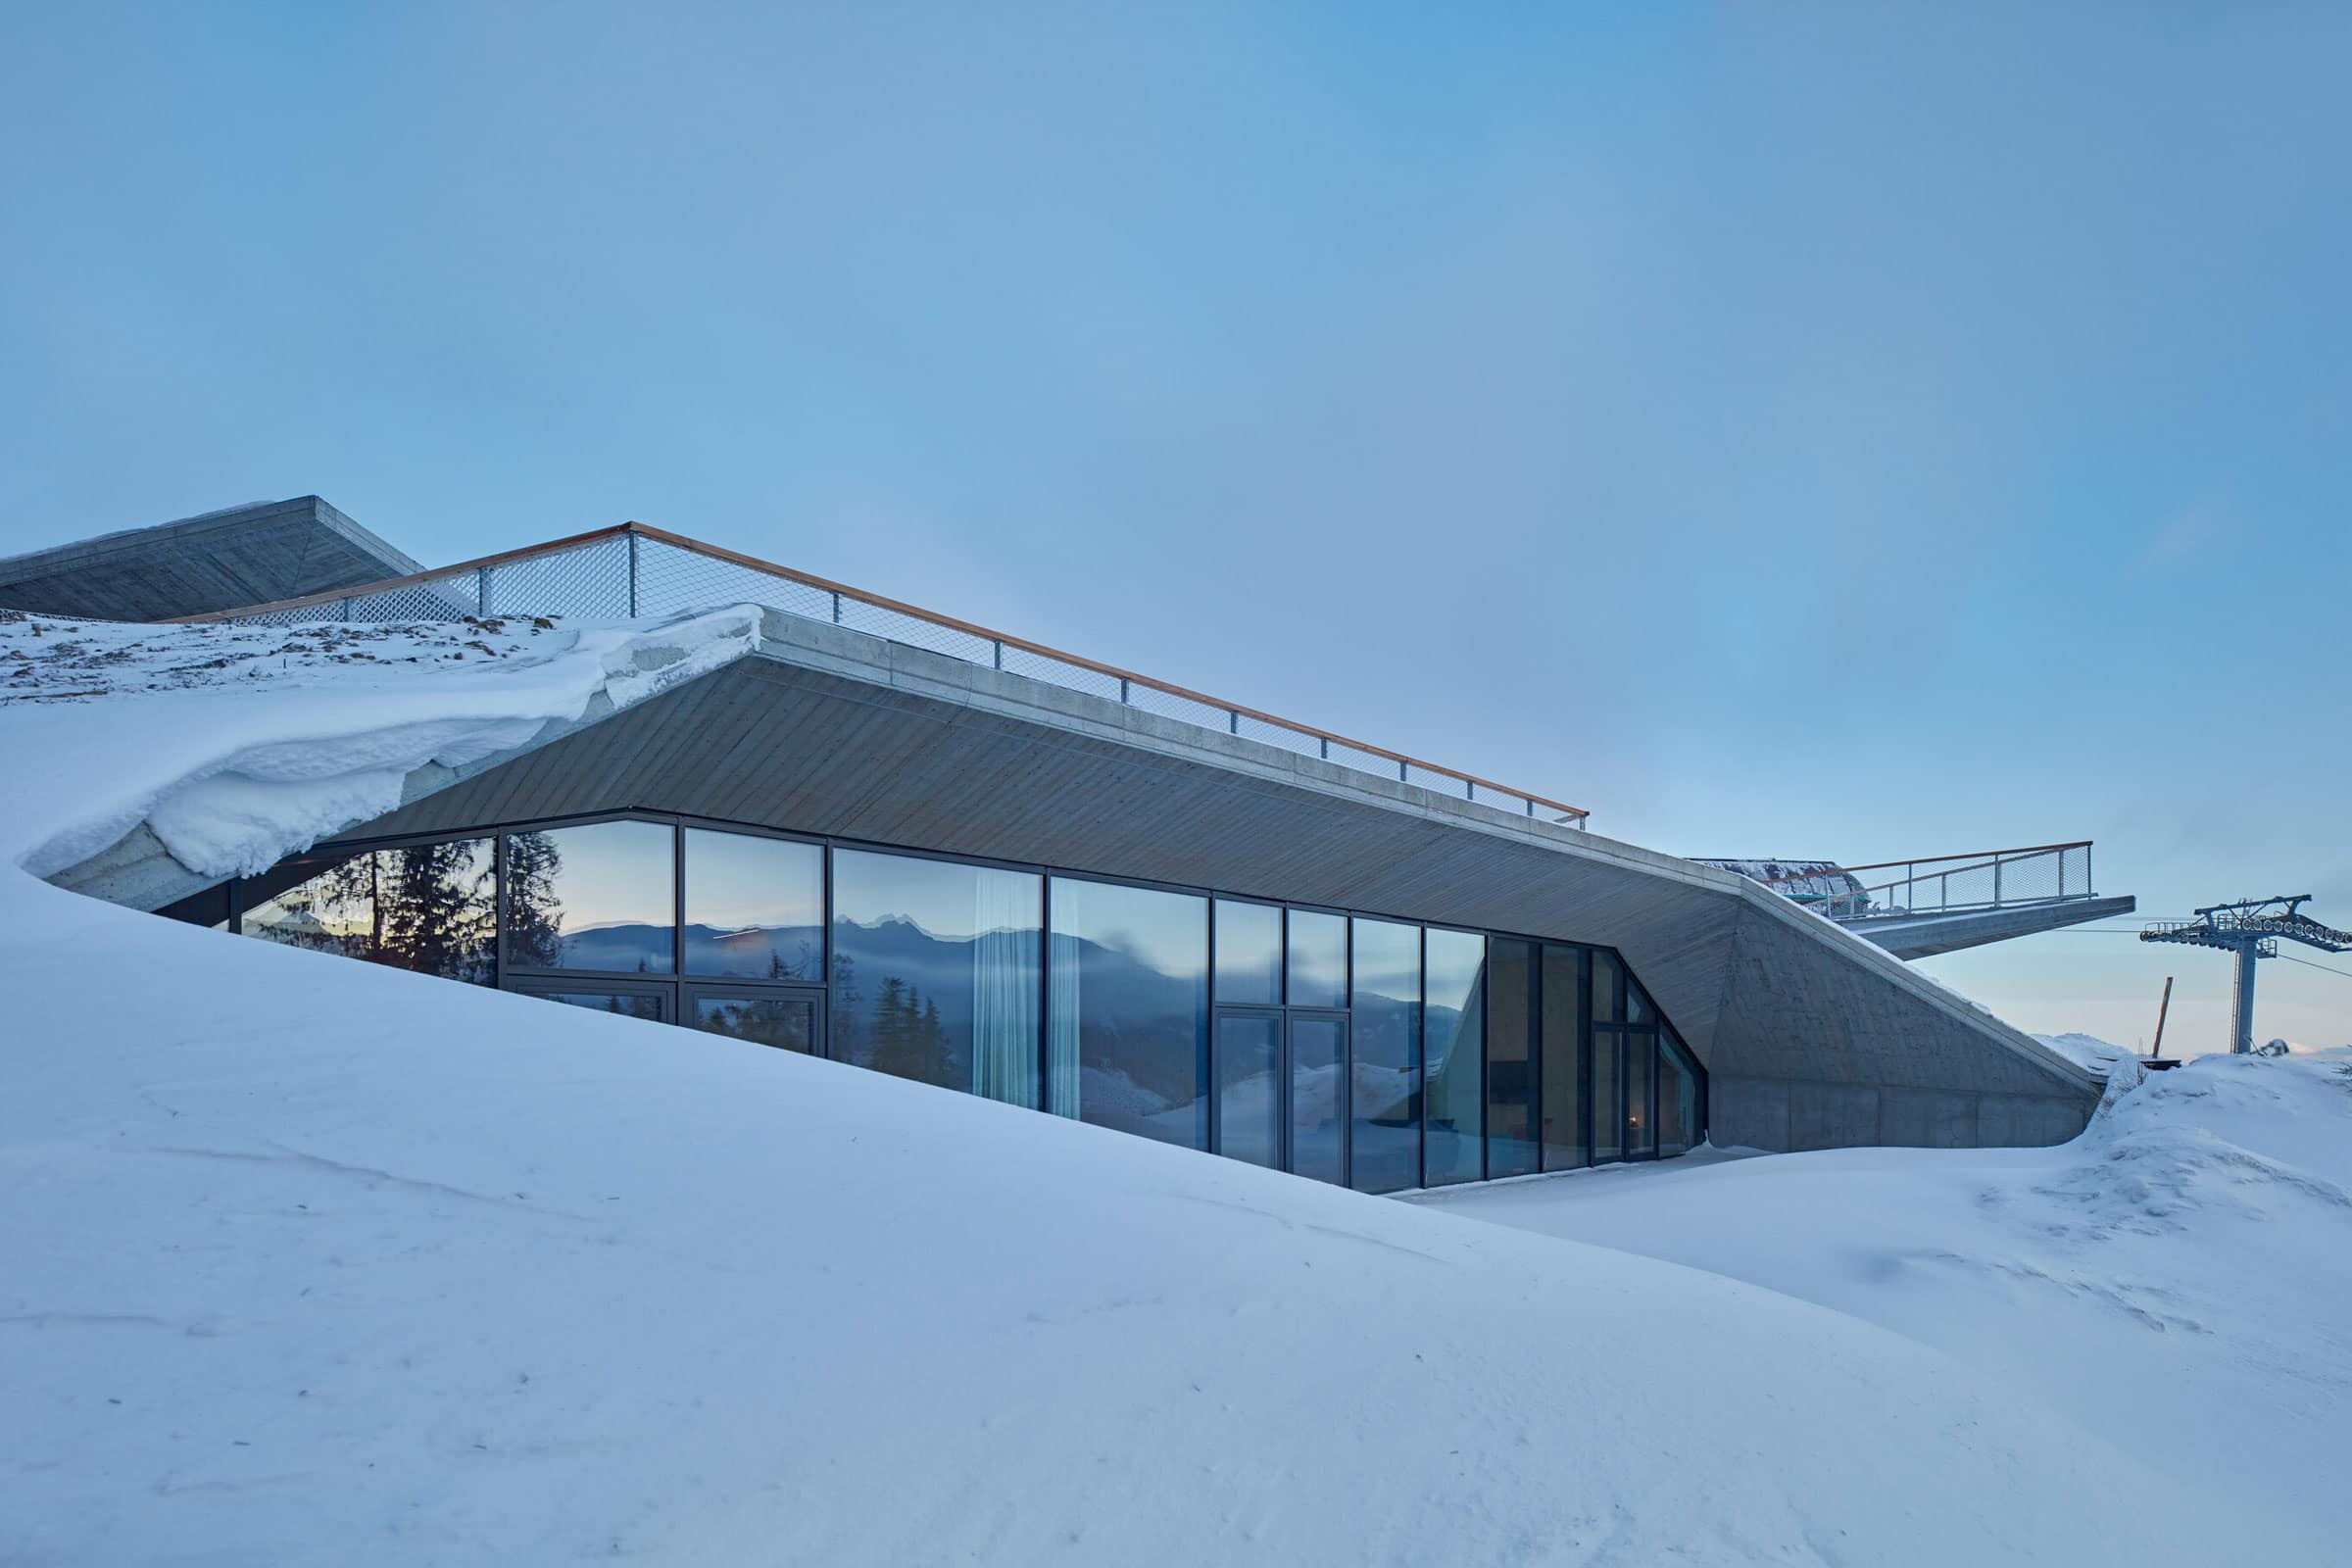 Ski Resort Design That Looks Like It’s Straight Out of a Spy Movie